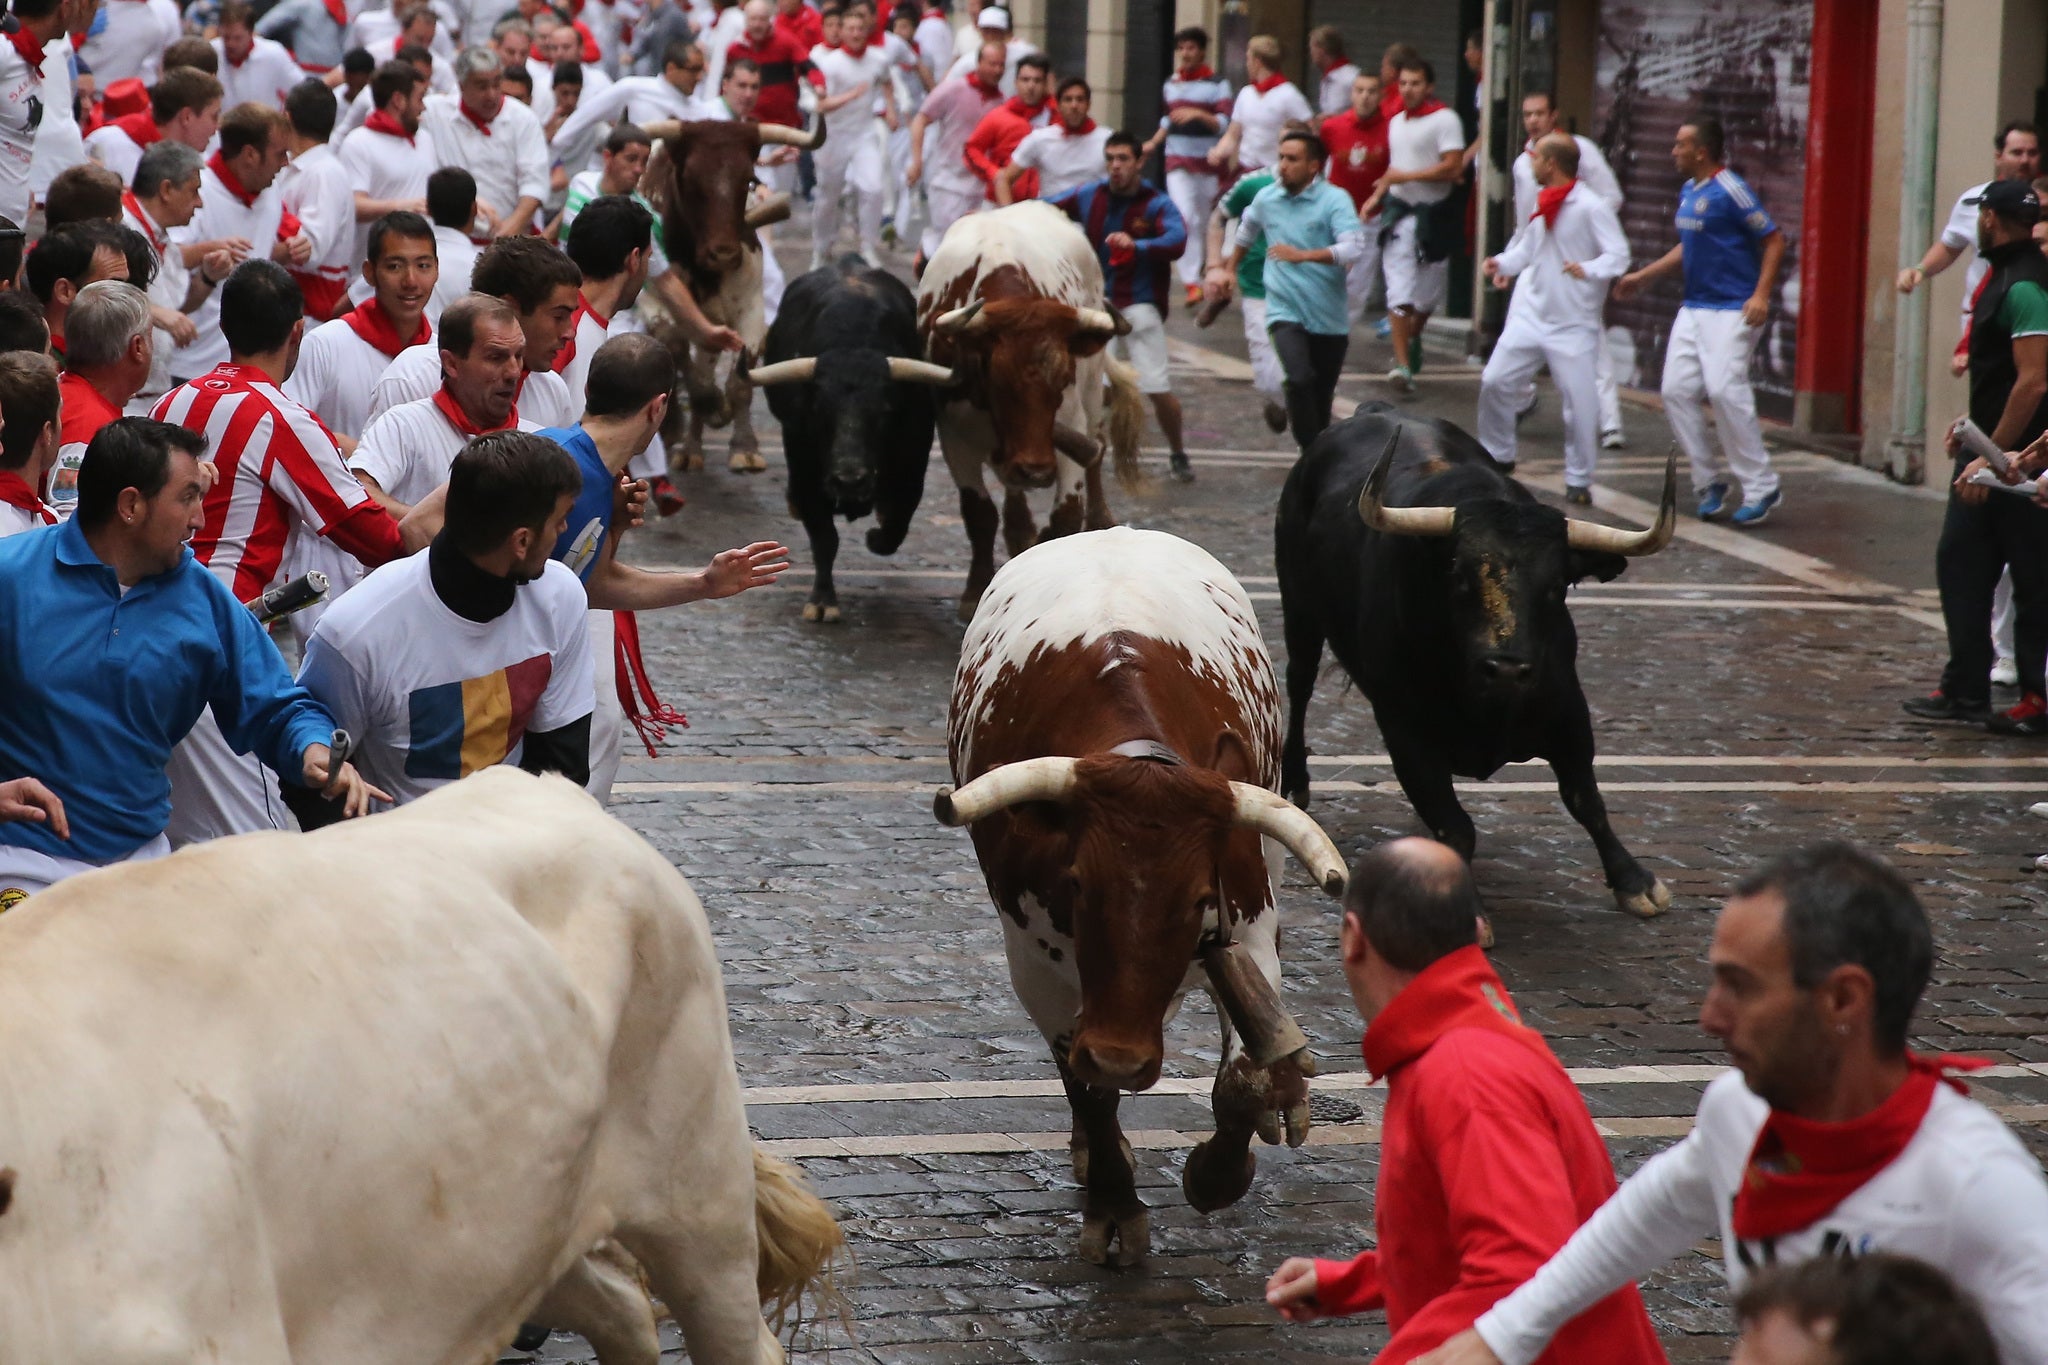 STA Travel has discontinued its tours to the Running of the Bulls